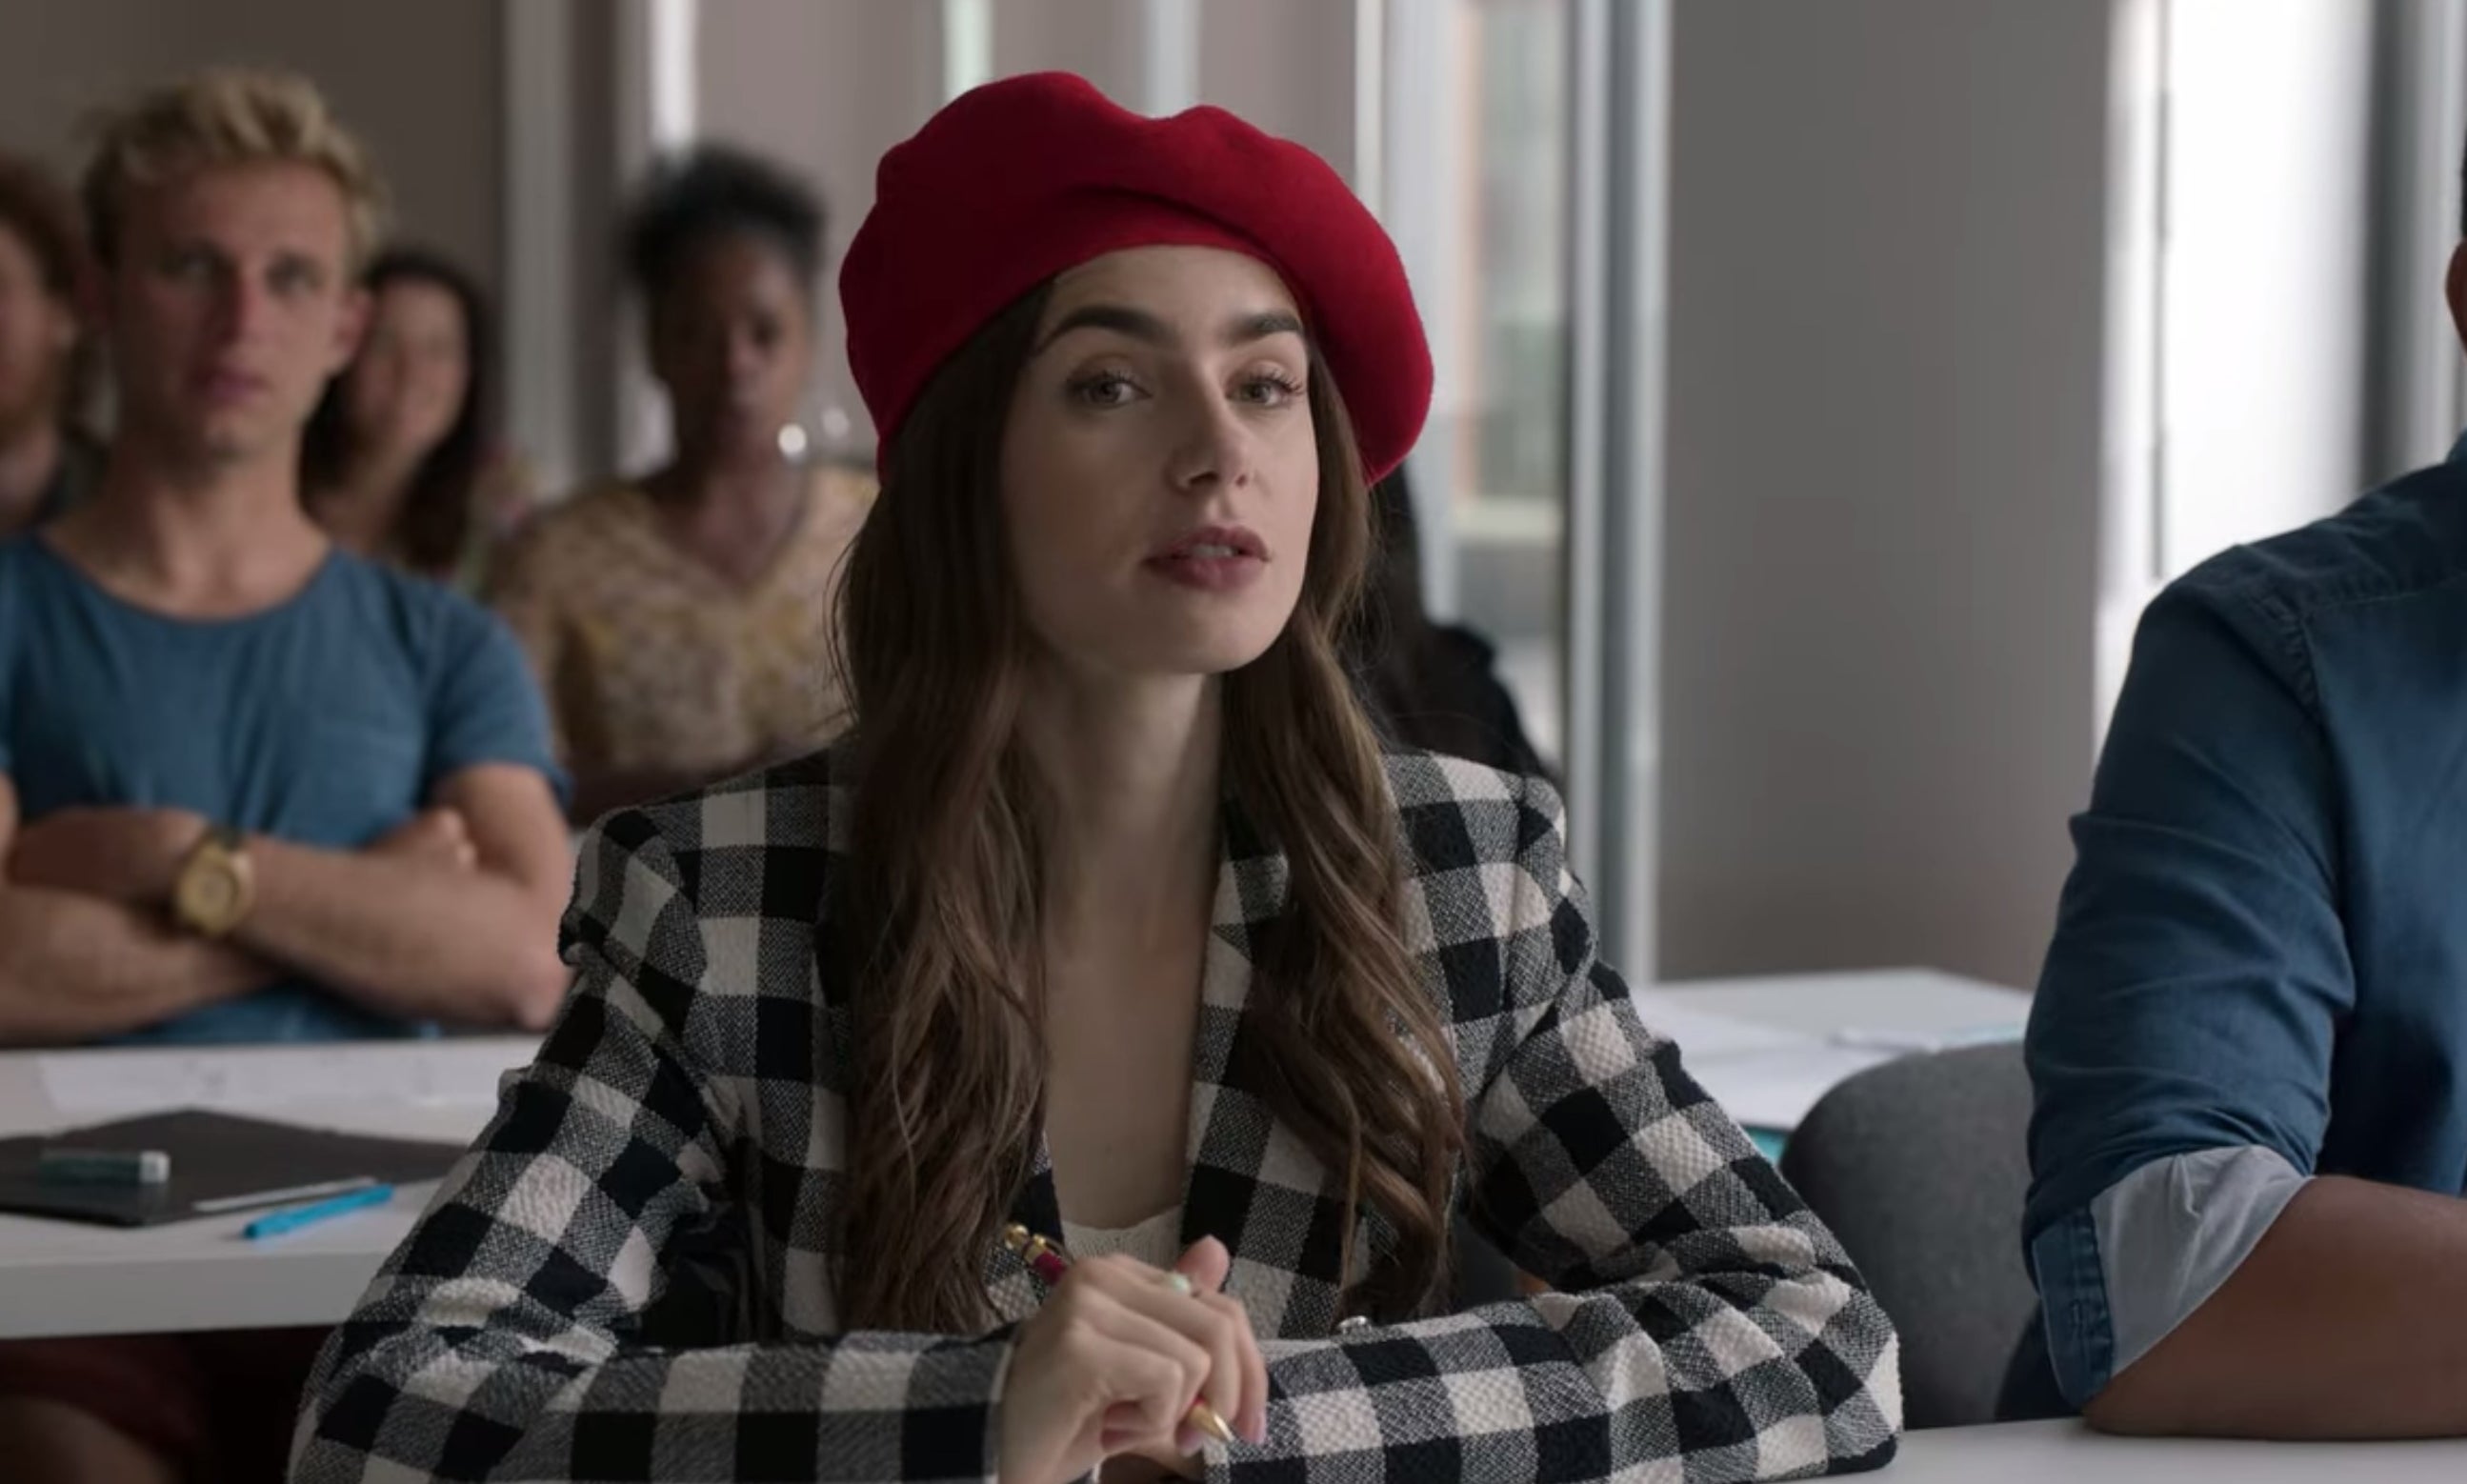 Emily wearing a red beret.